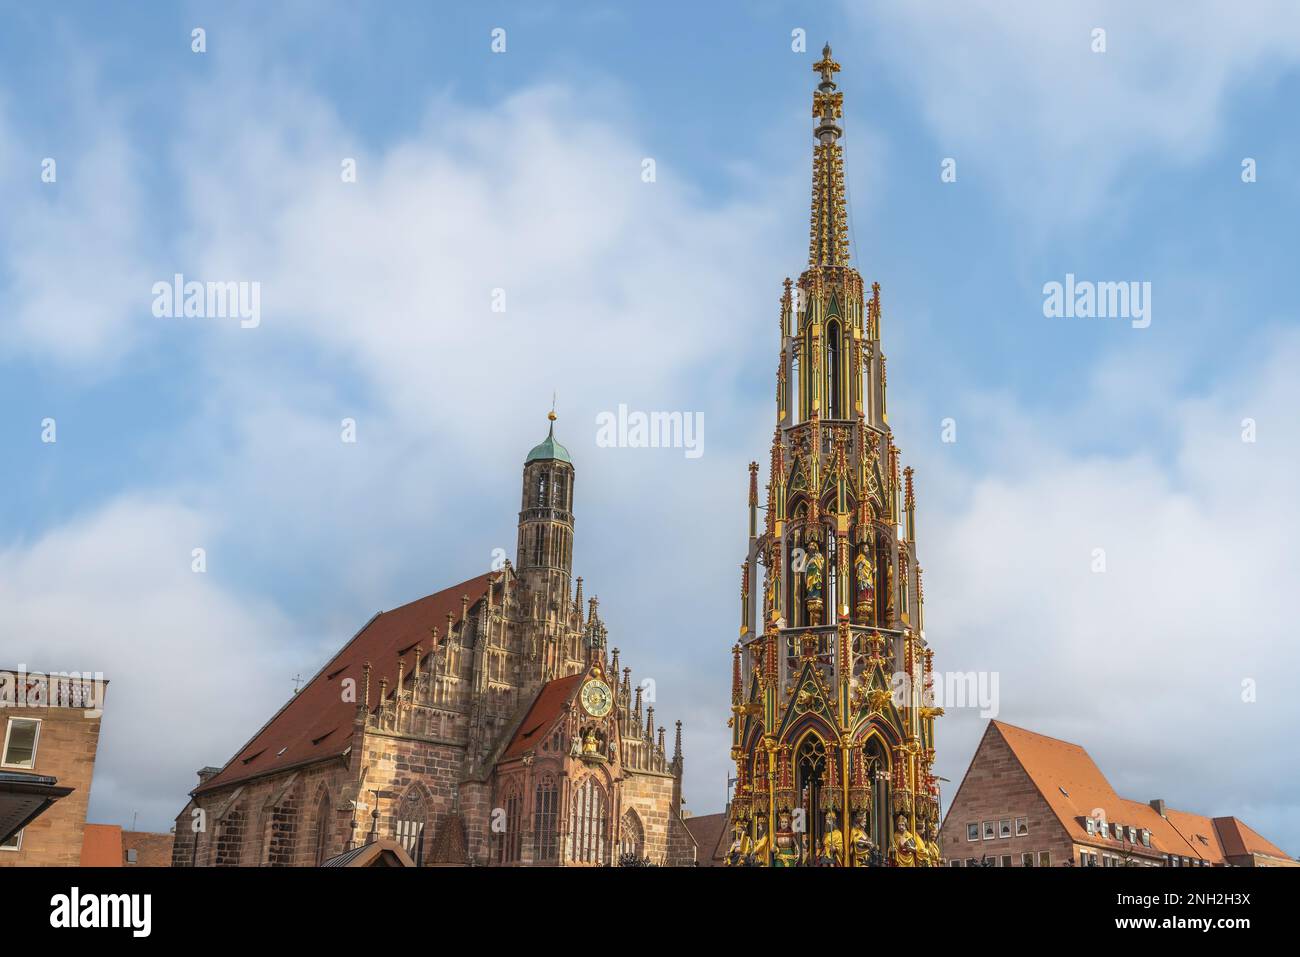 Hauptmarkt Square with Frauenkirche (Church of Our Lady) and Schoner Brunnen fountain - Nuremberg, Bavaria, Germany Stock Photo